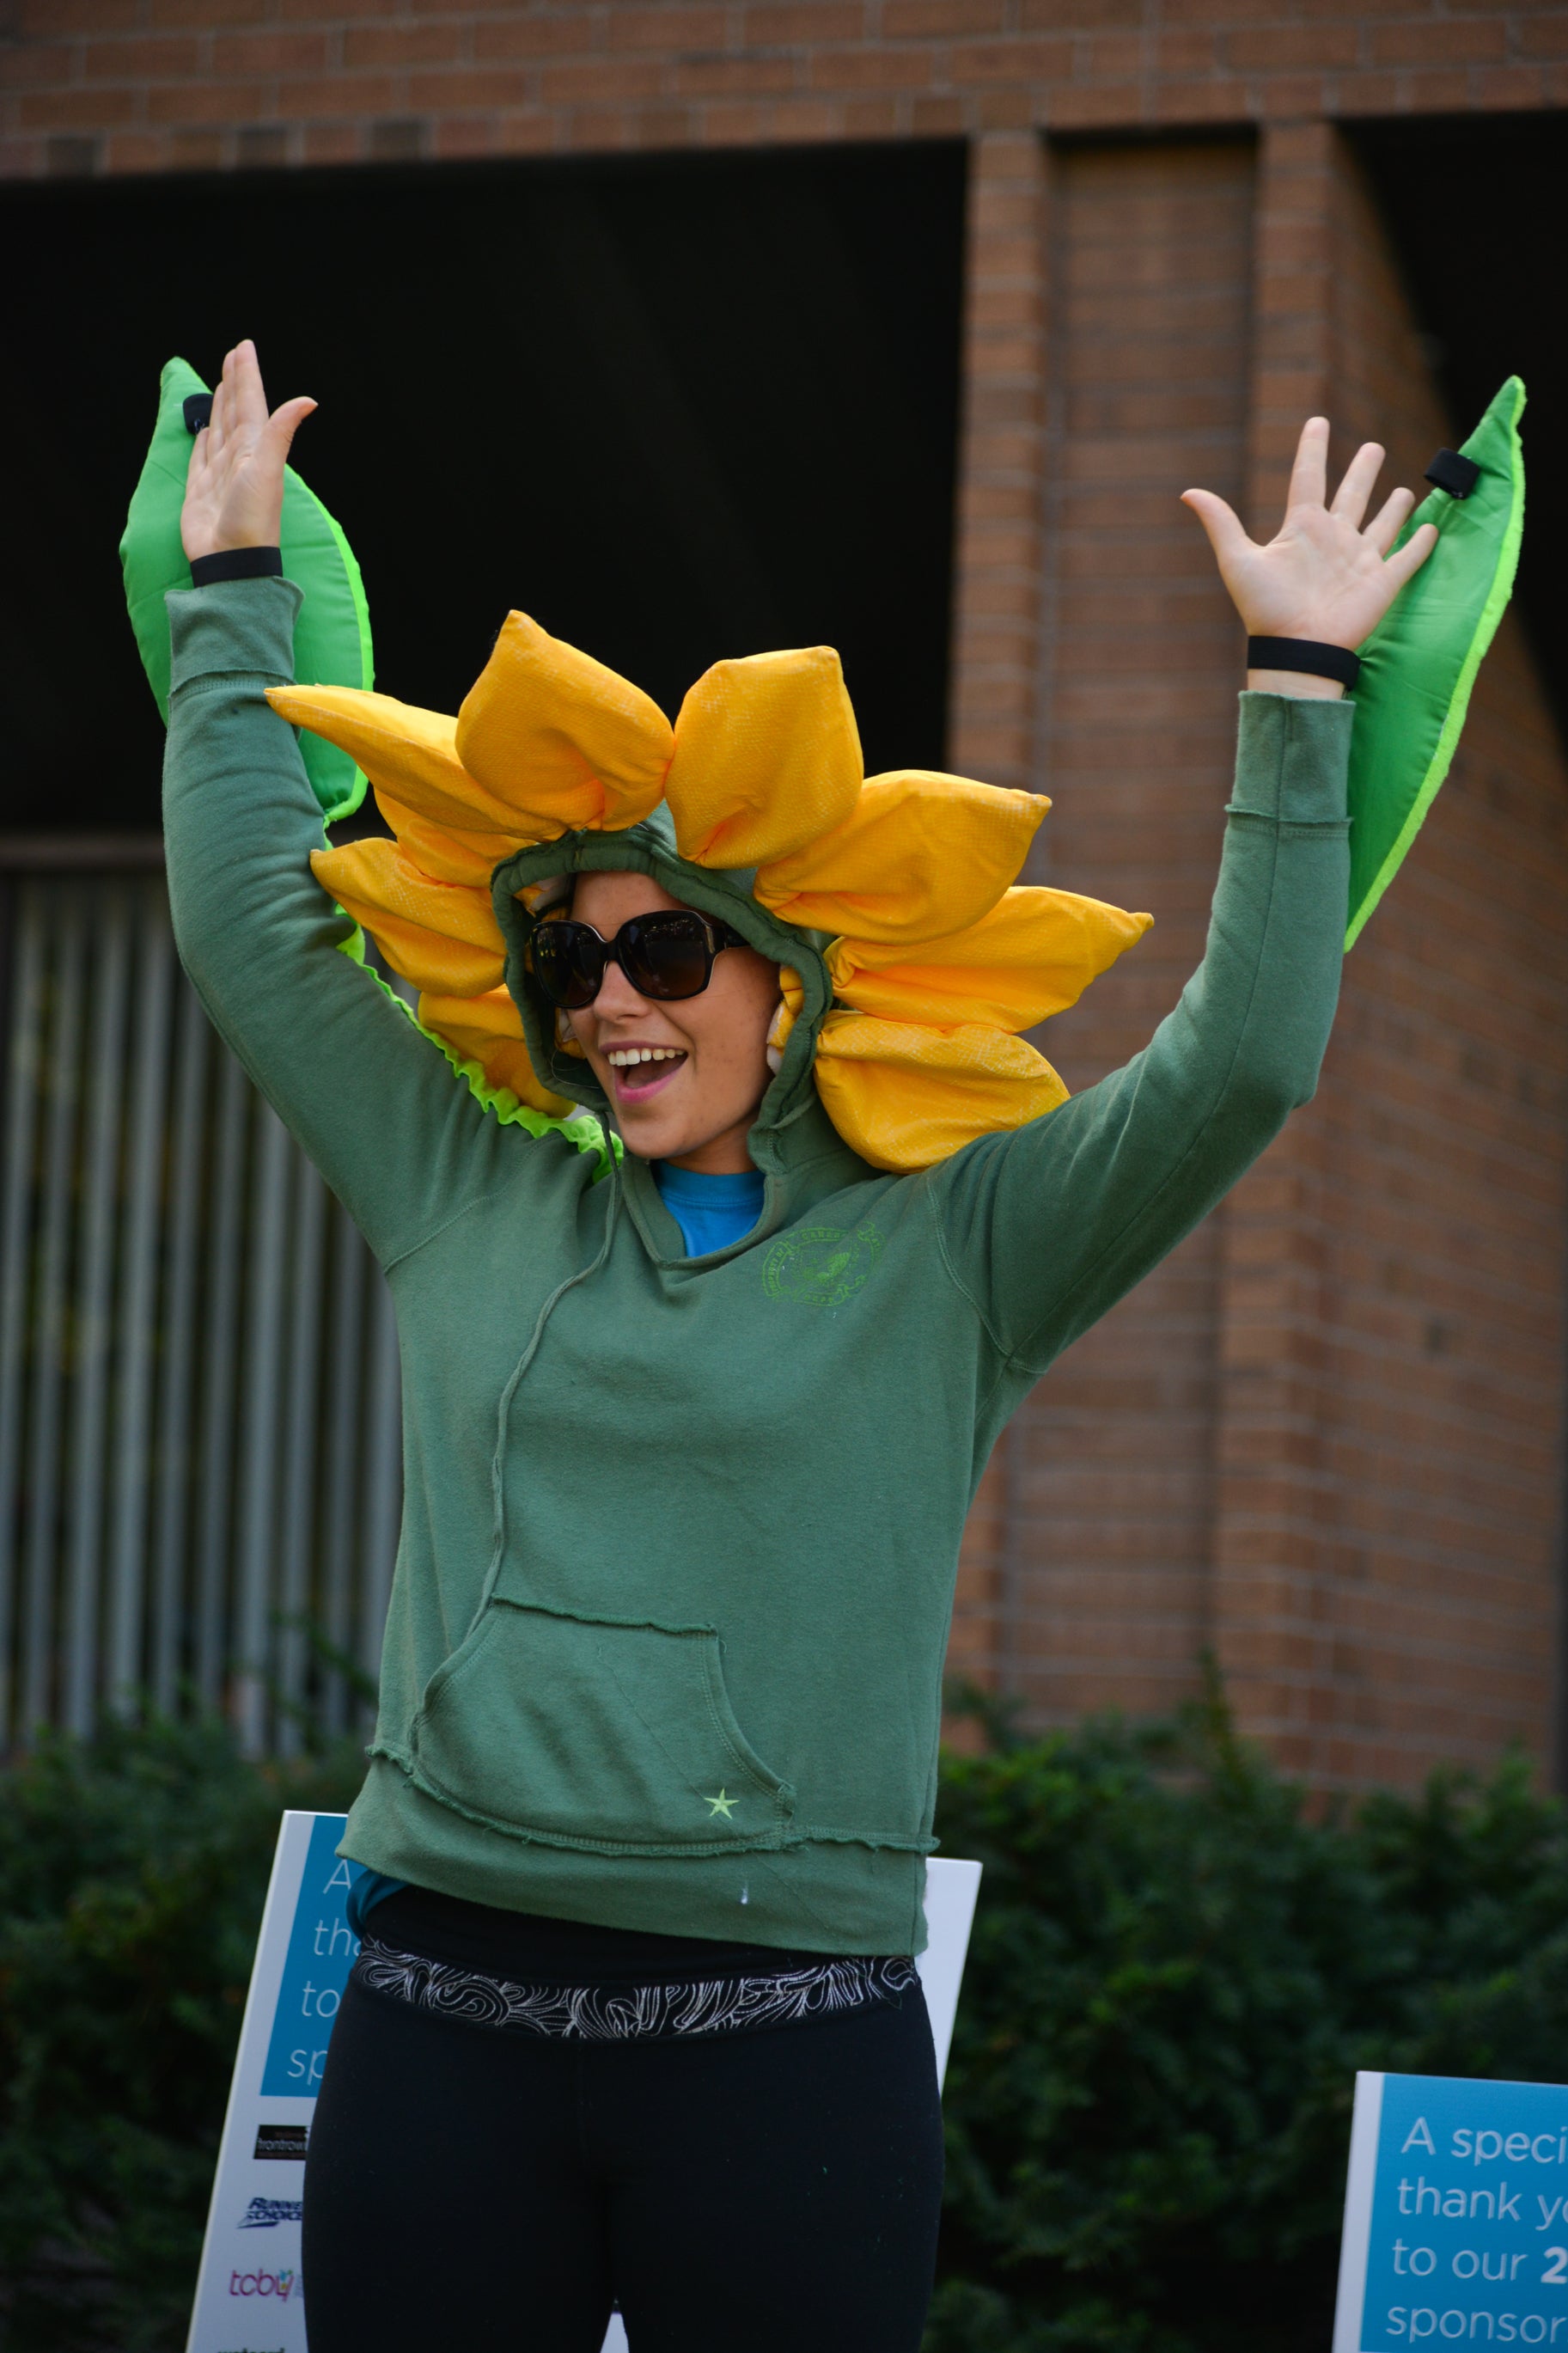 Lady smiling with her hands up dressed as a flower.